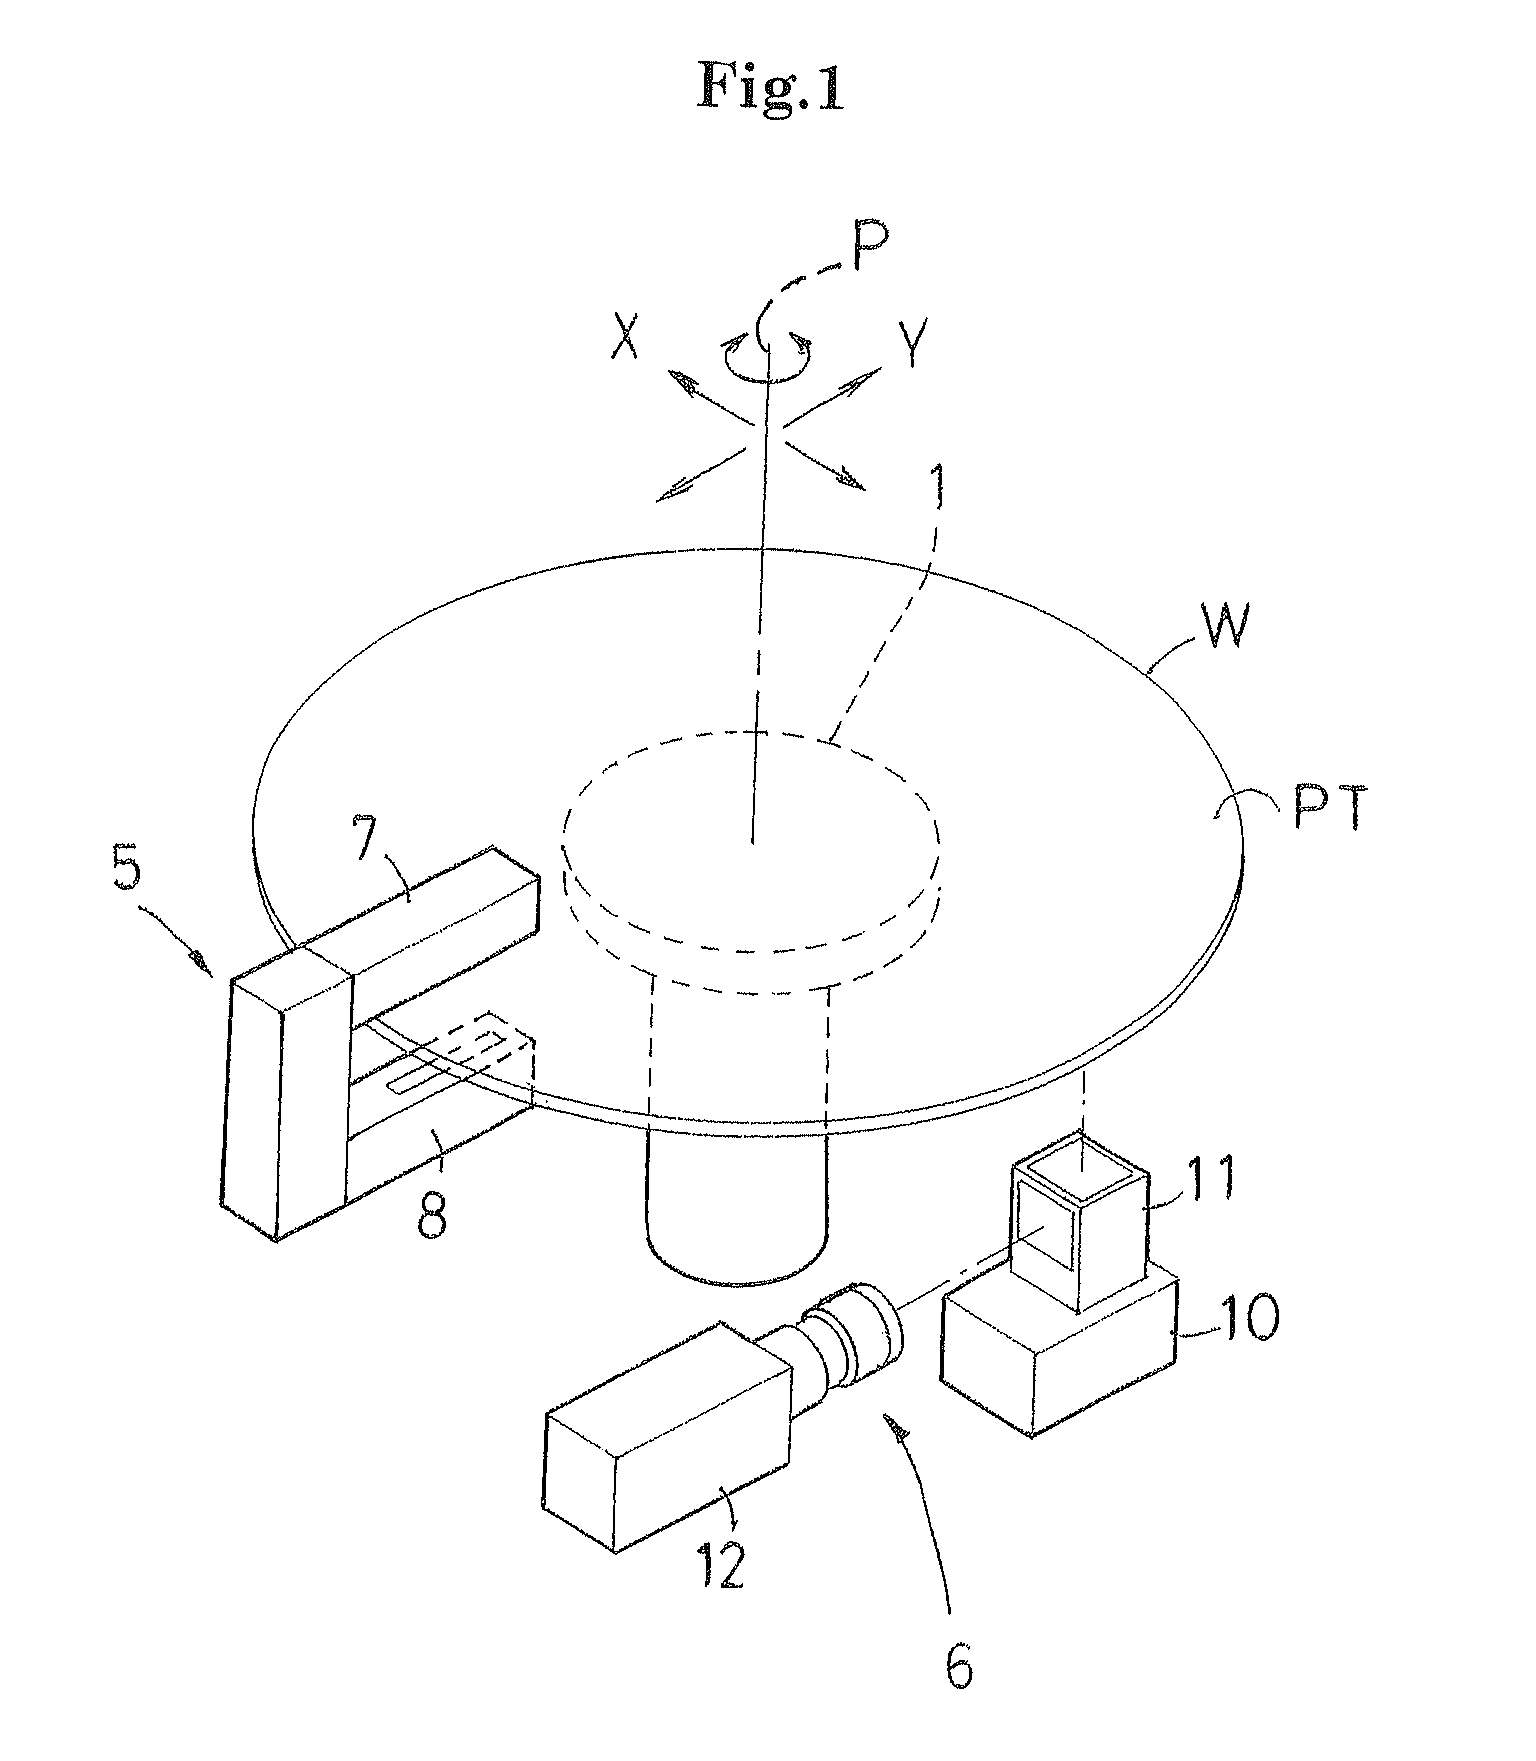 Method for joining adhesive tape to semiconductor wafer and method for separating protective tape from semiconductor wafer